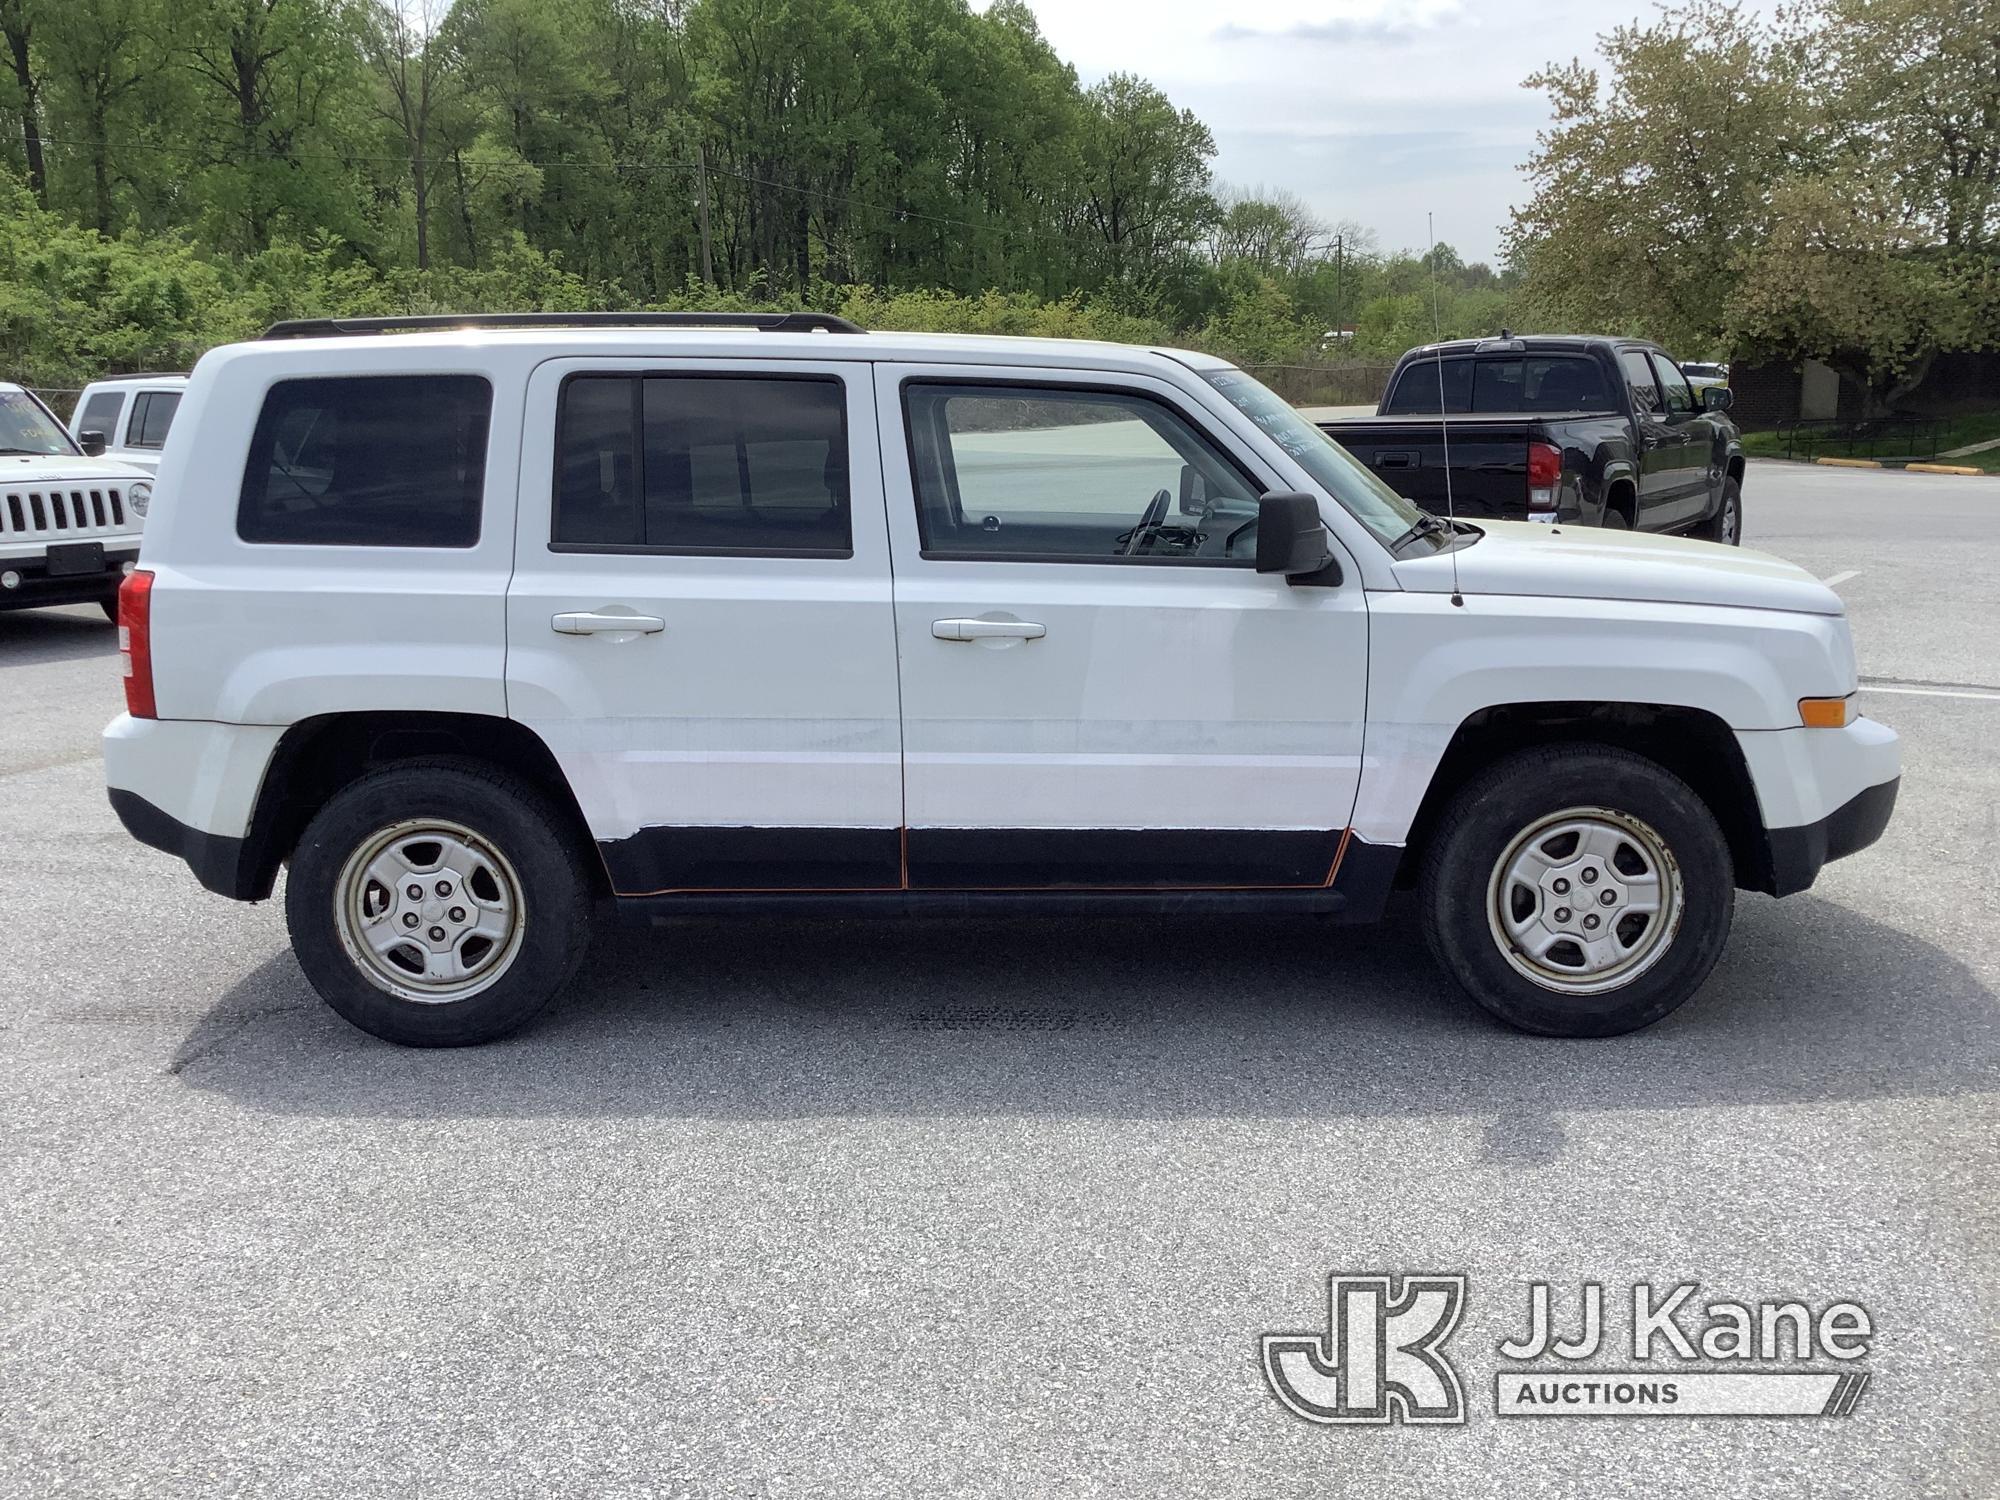 (Chester Springs, PA) 2014 Jeep Patriot 4x4 4-Door Sport Utility Vehicle Runes & Moves) (Only Runs O